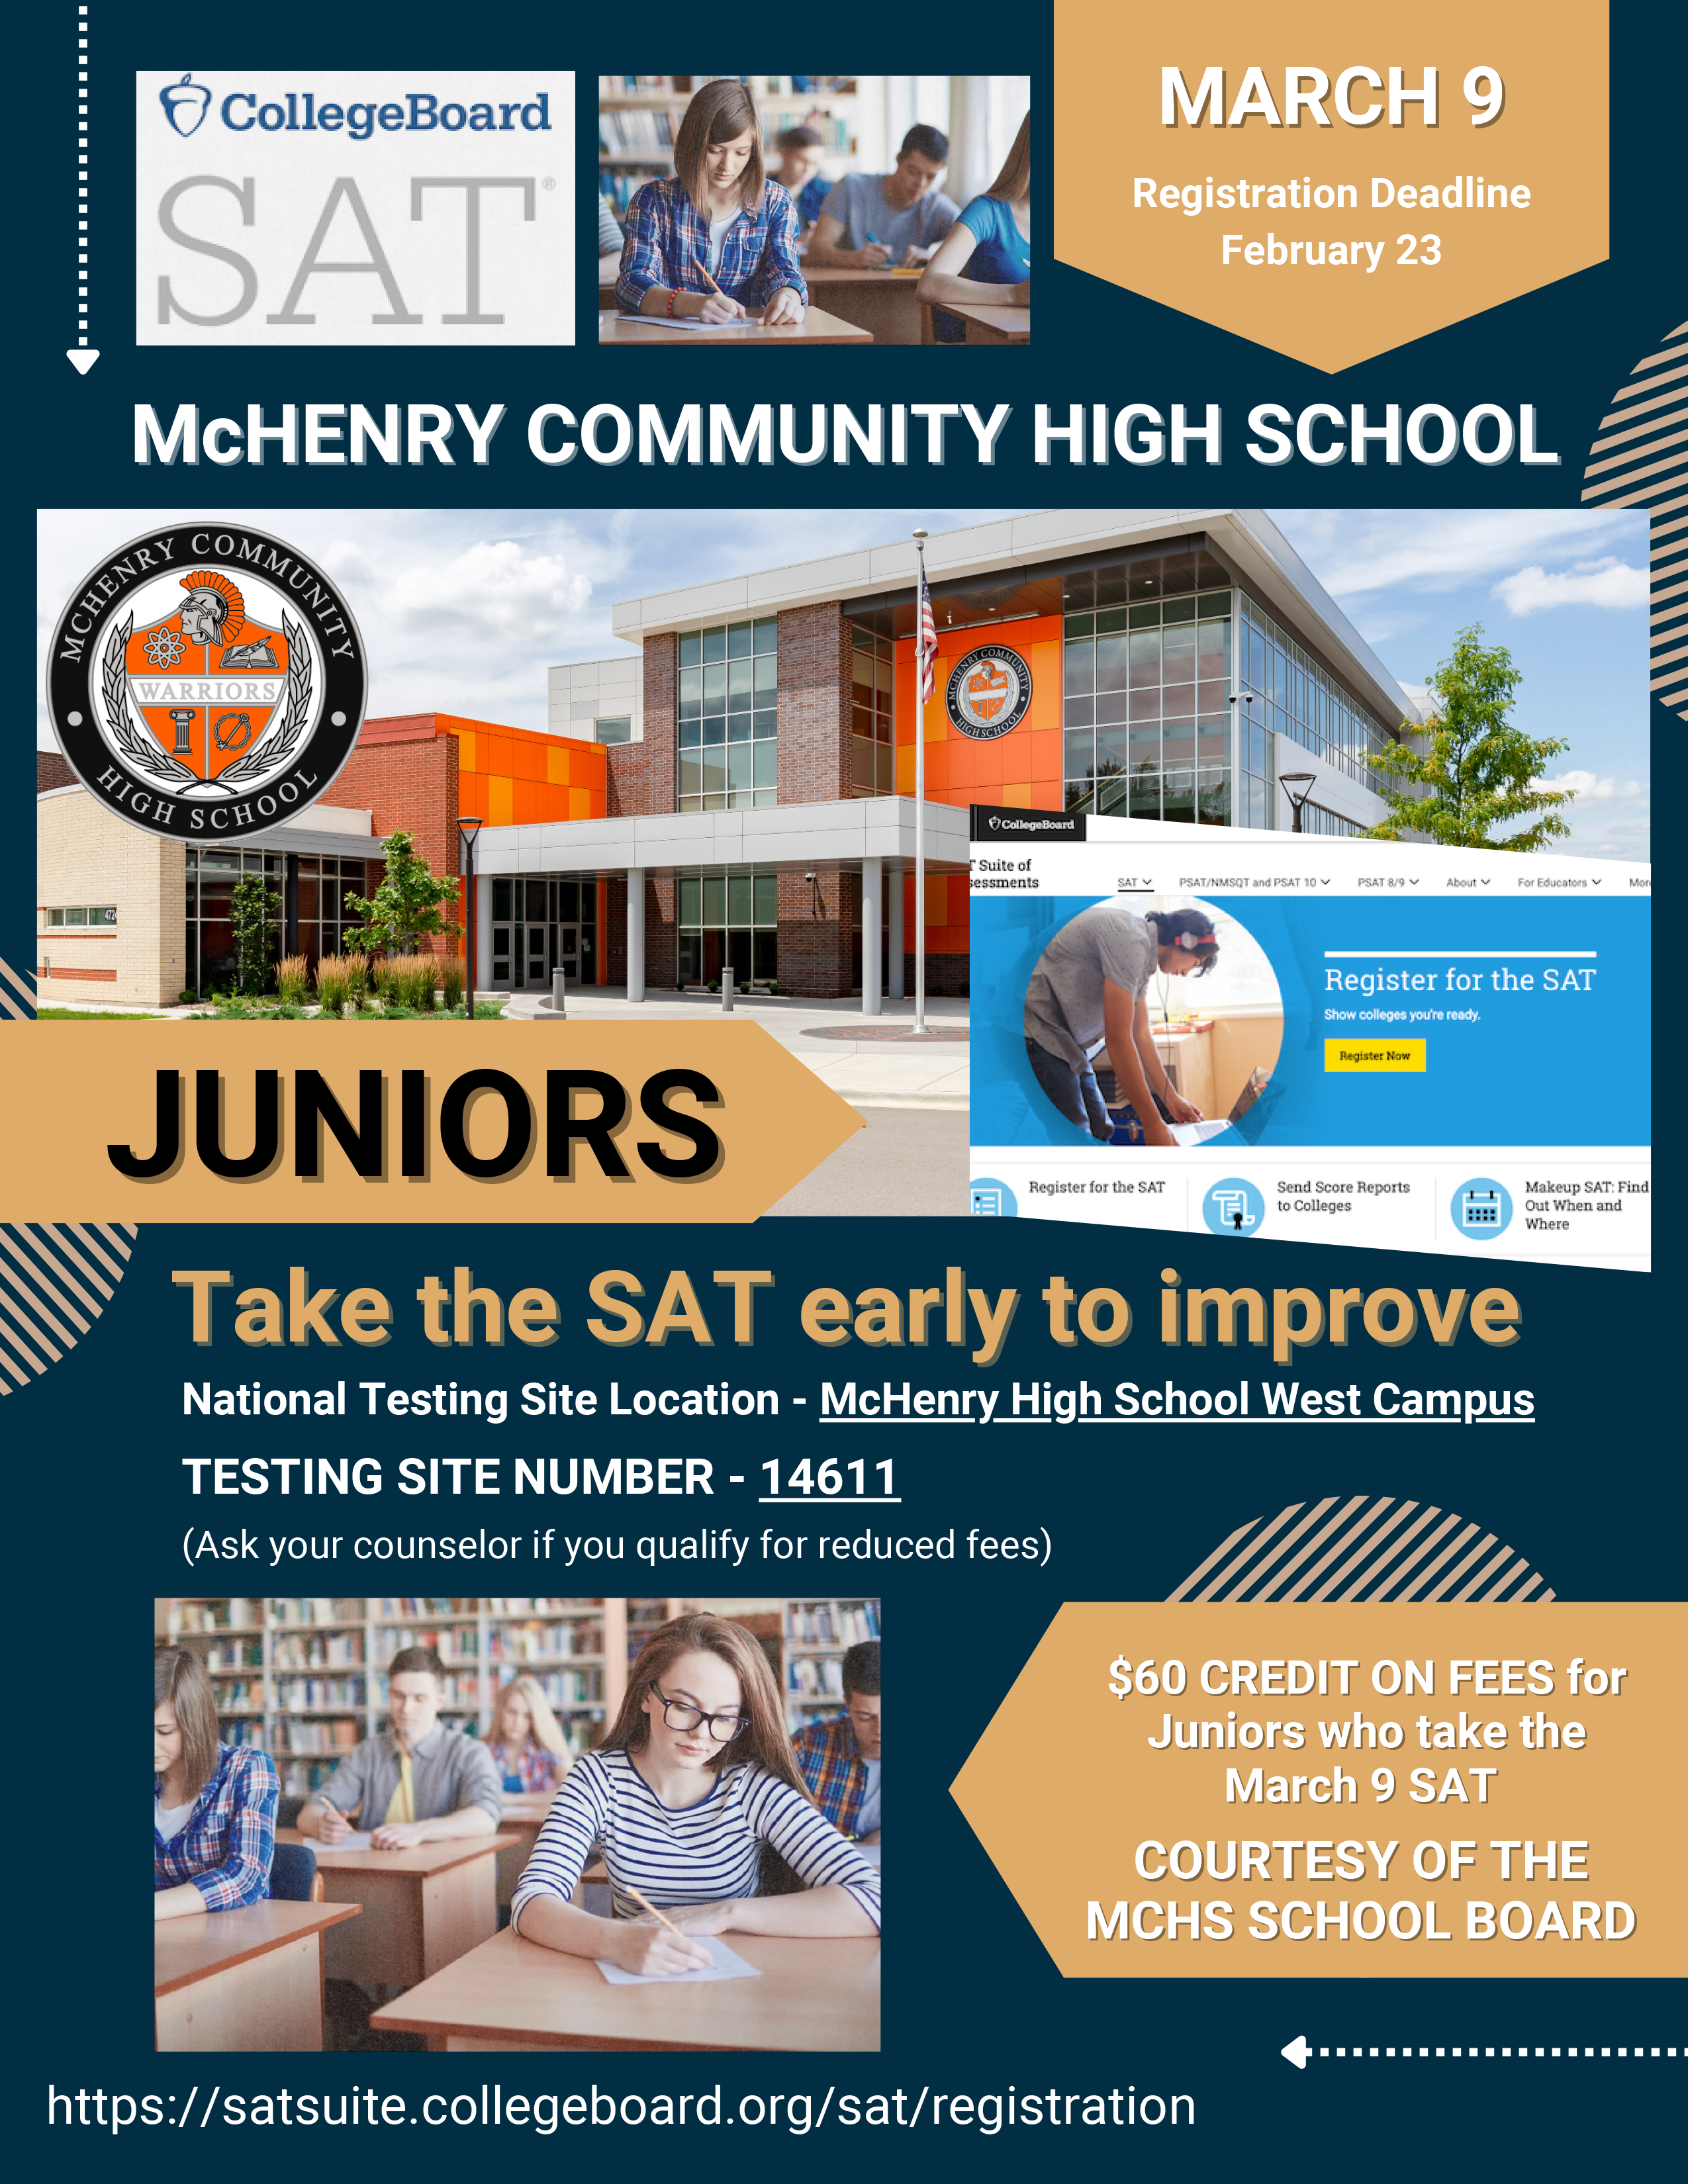 College Board SAT March 9: Registration Deadline February 23. McHenry Community High School. Juniors take the SAT early to improve. National Testing Site Location- McHenry High School West Campus Testing Site Number 14611  (Ask your counselor if you qualify for reduced fees. sat.suit.ecollegeboard.org/sat/registration $60 credit on fees fo rJuniors who take the March 9 SAT Courtesy of the MCHS School Board